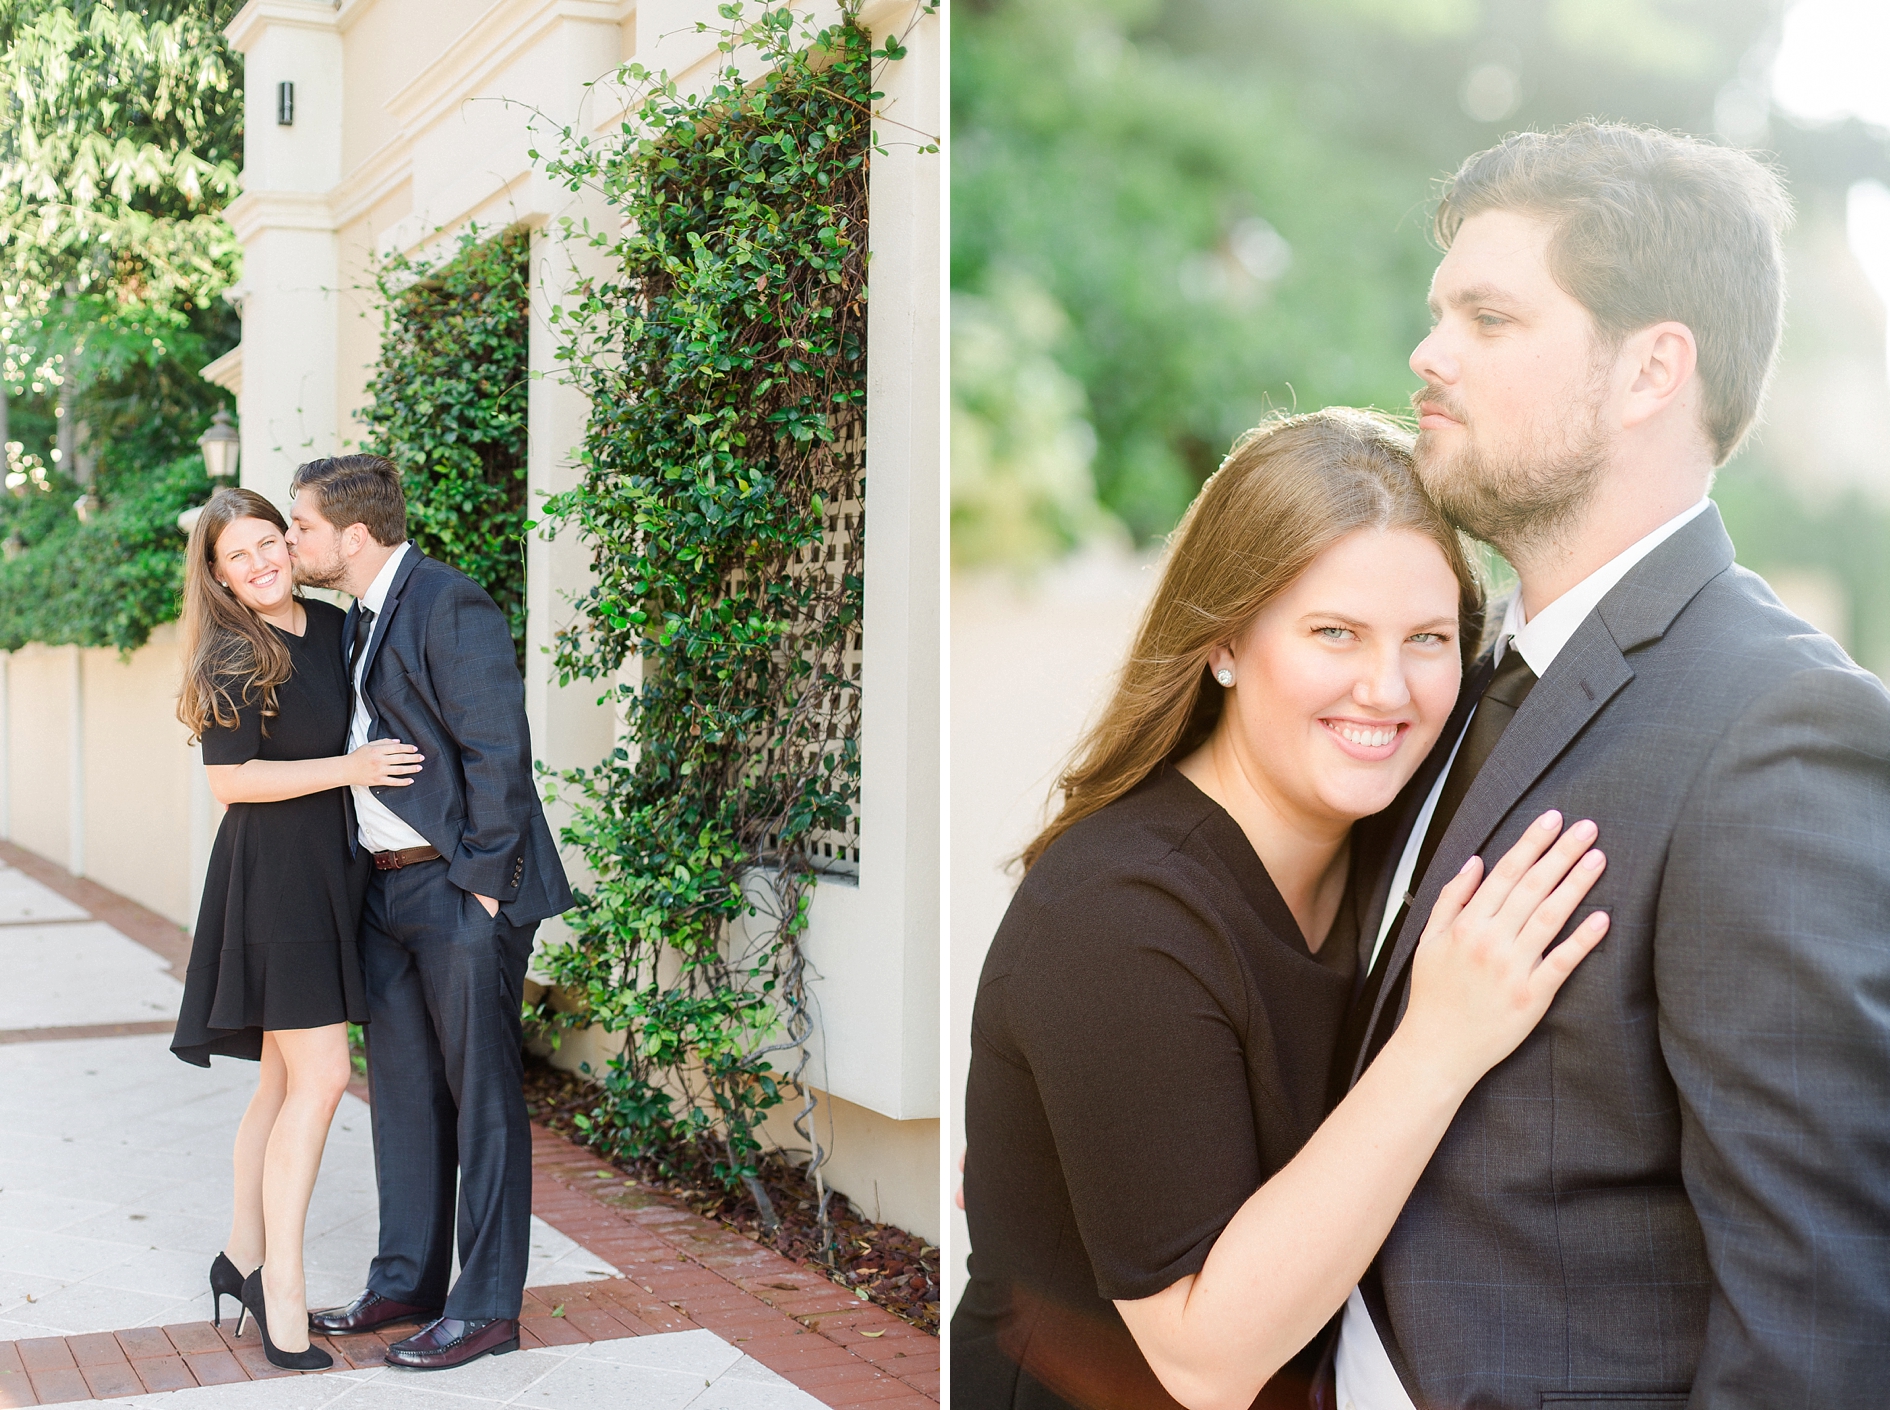 Clearwater Engagement | © Ailyn La Torre Photography 2015